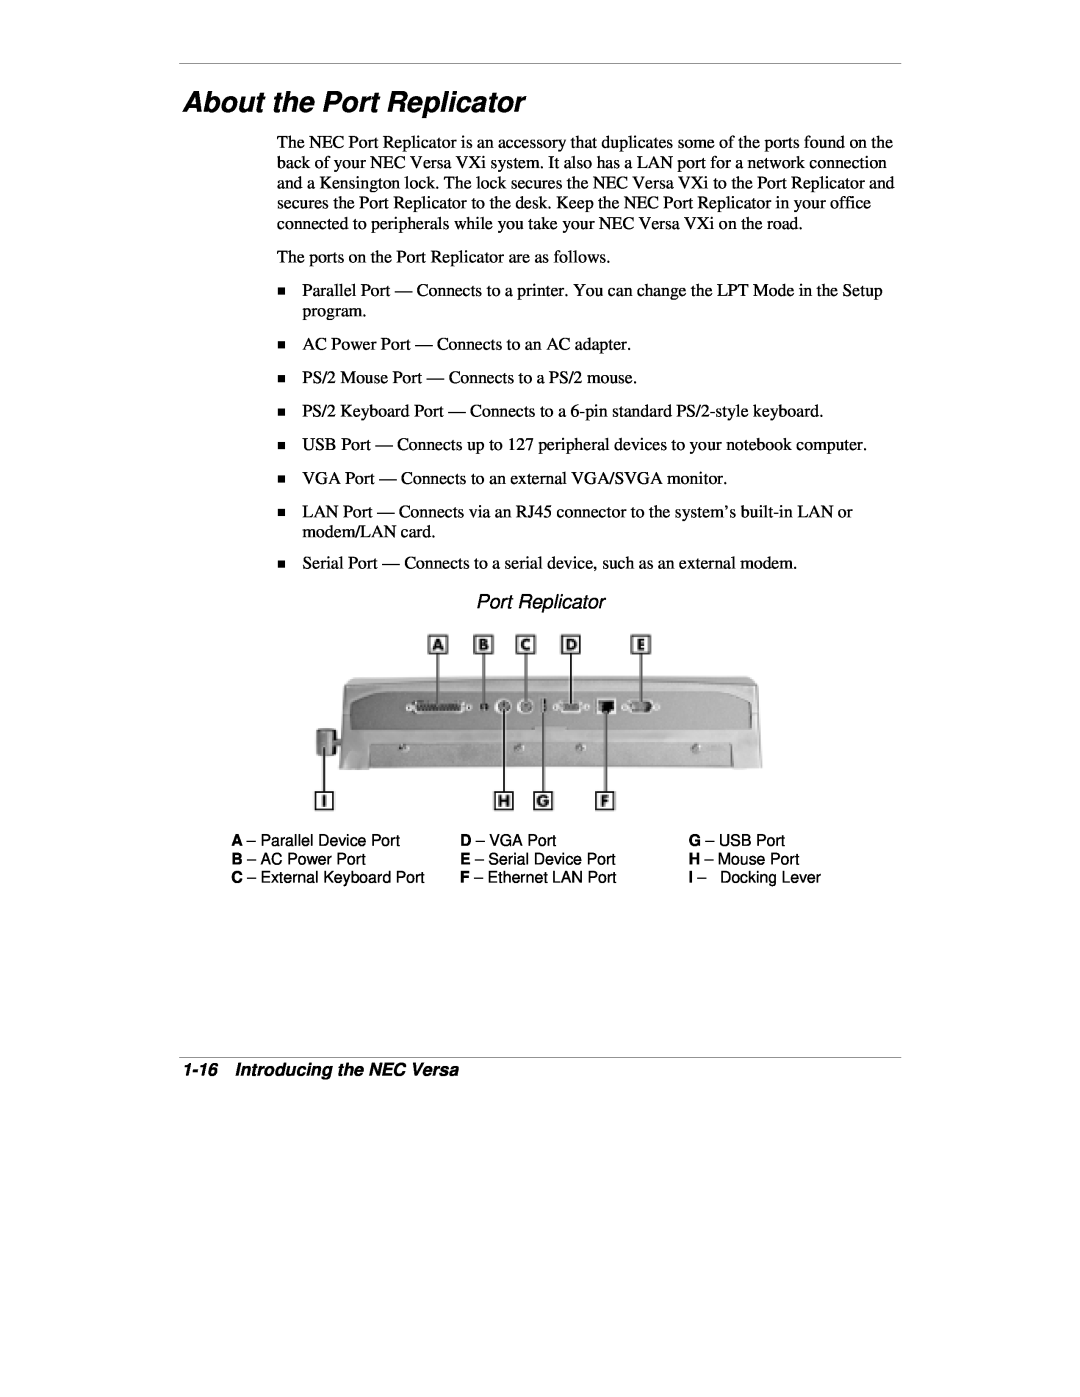 NEC VXi manual About the Port Replicator, 1-16Introducing the NEC Versa 